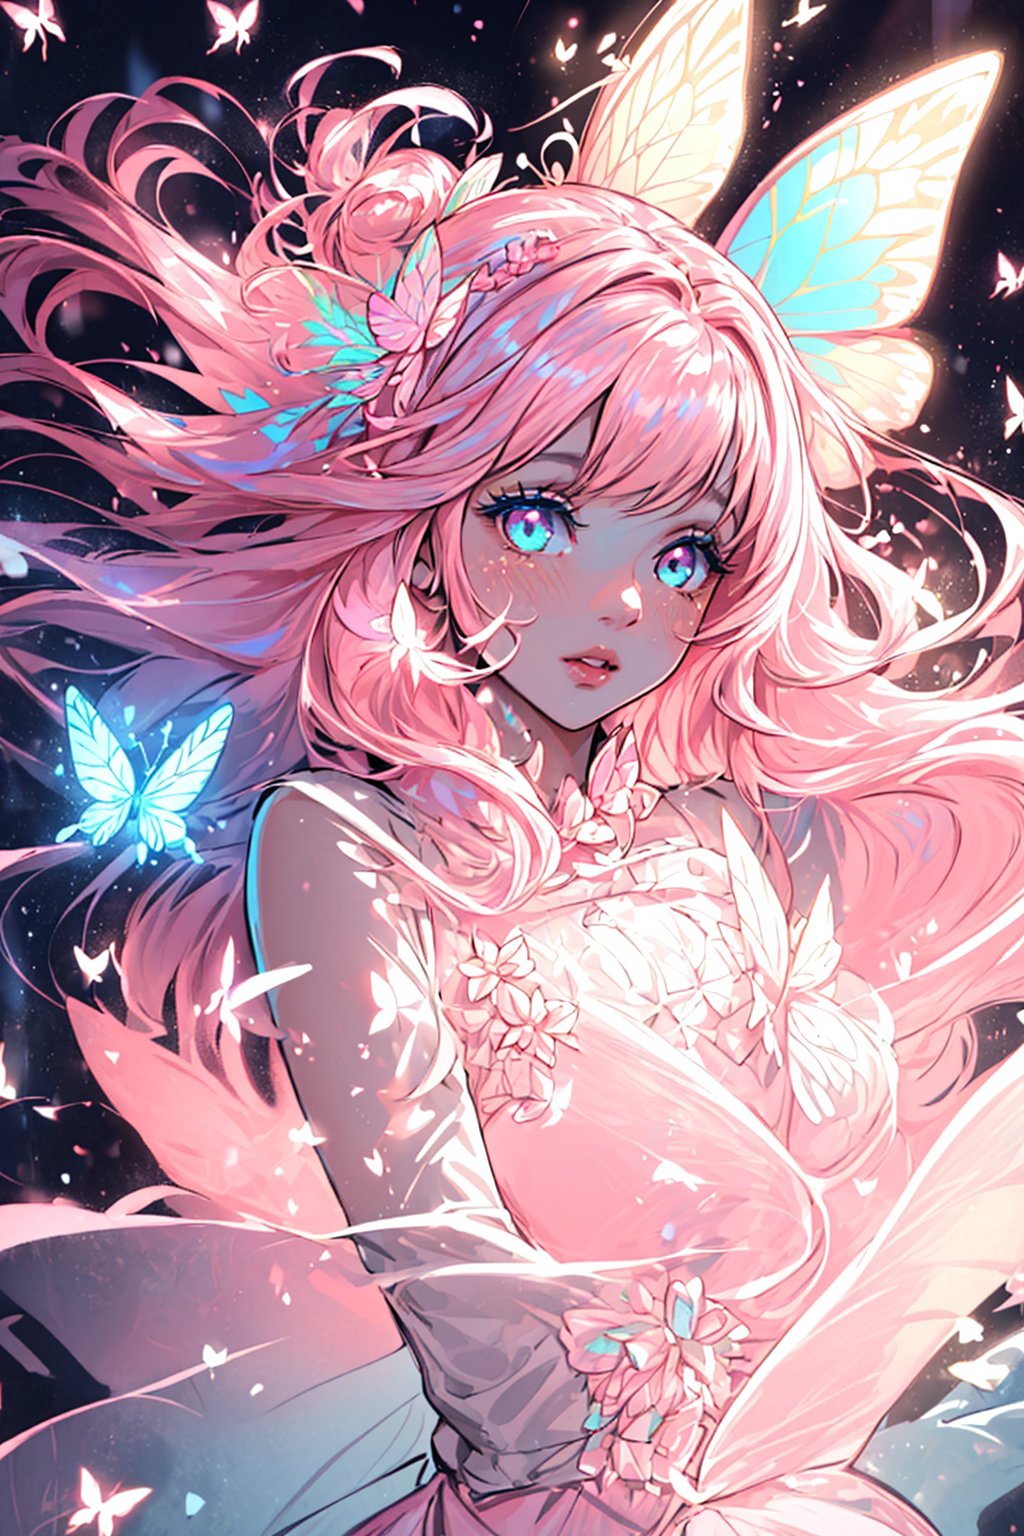 masterpiece, 1 girl, Extremely beautiful woman standing in a glowing lake with very large glowing pink butterfly wings, glowing hair, long cascading hair, neon hair, ornate pink and white butterfly dress, midnight, lots of glowing butterflies flying around, full lips, hyperdetailed face, detailed eyes